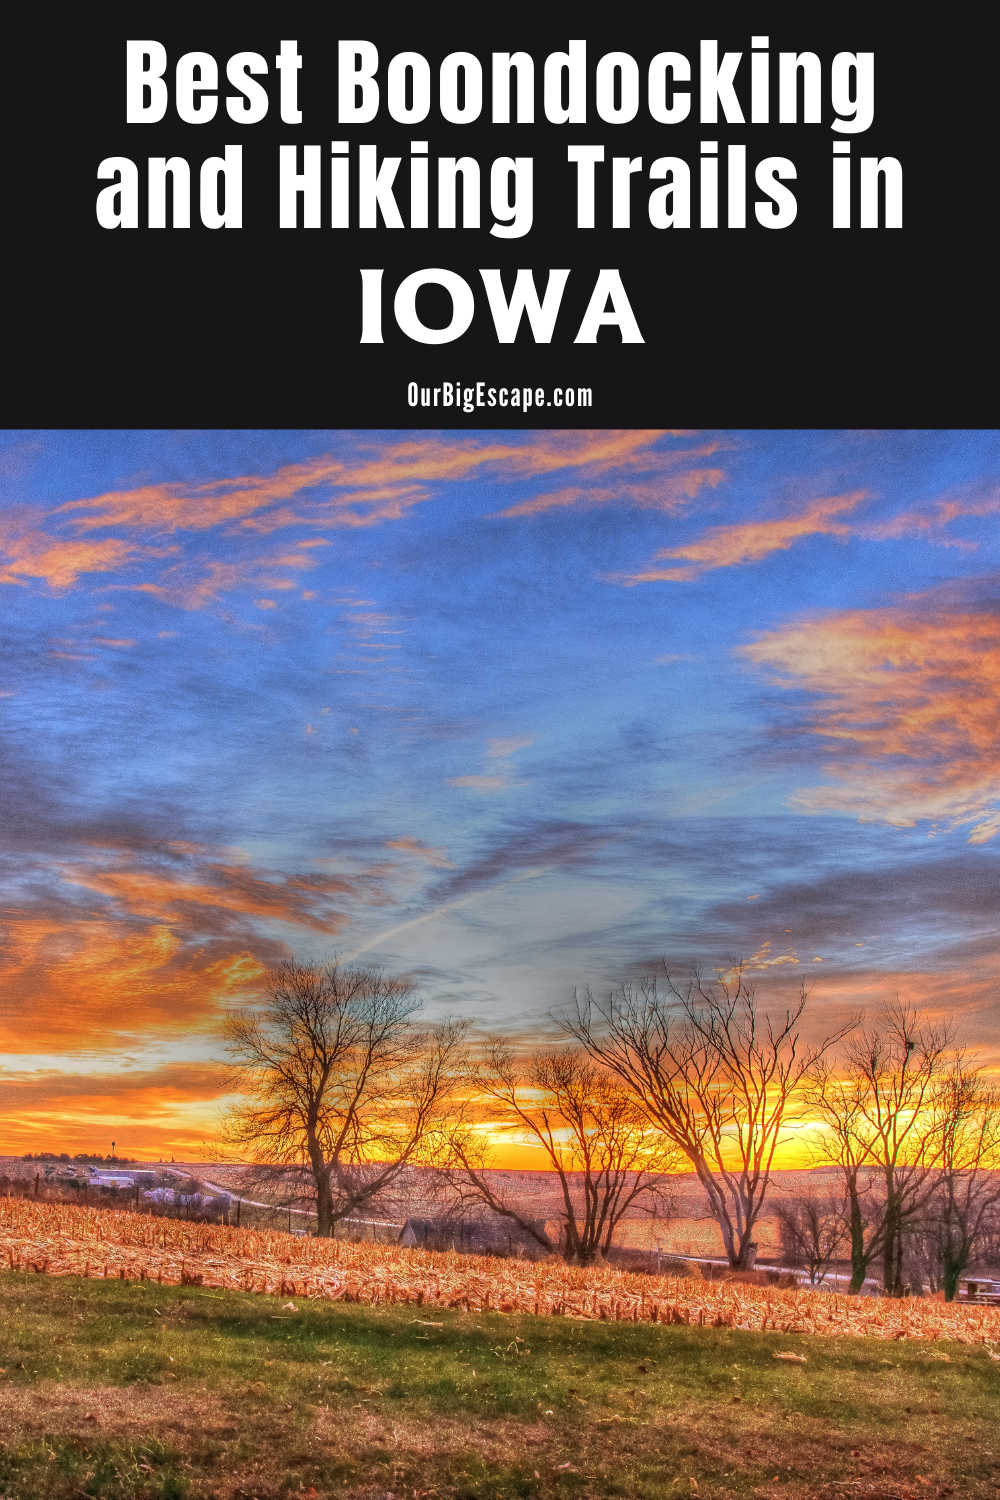 Best Boondocking and Hiking Trails in Iowa